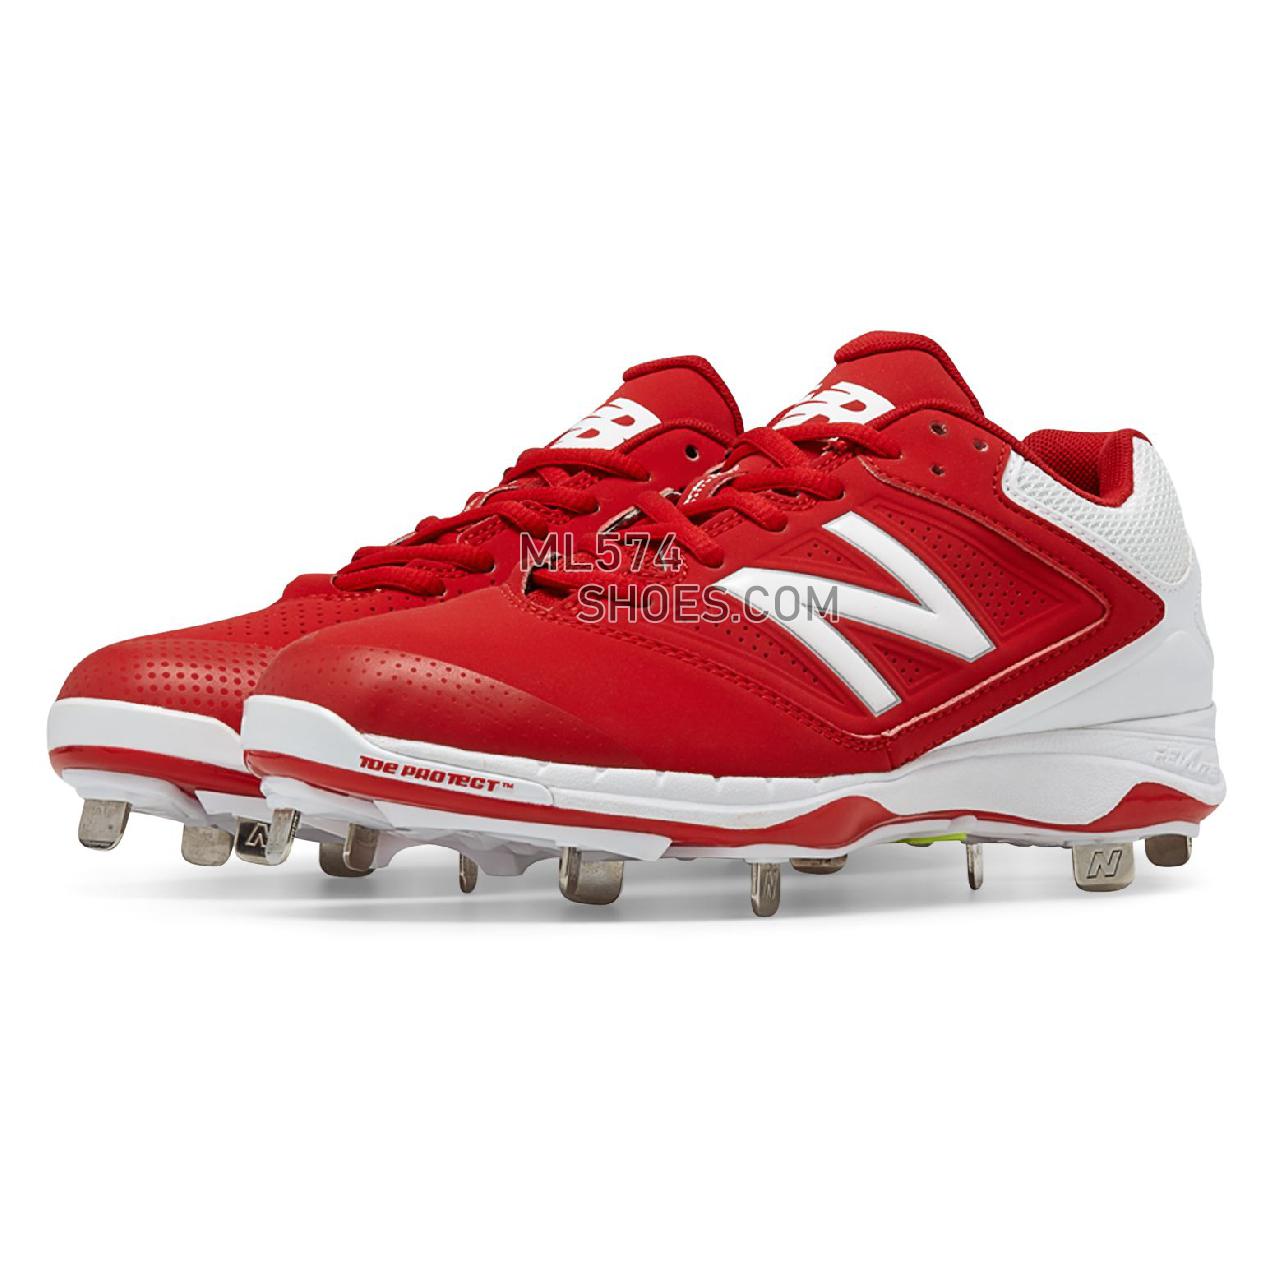 New Balance Metal 4040v1 - Women's 4040 - Baseball Red with White - SM4040R1